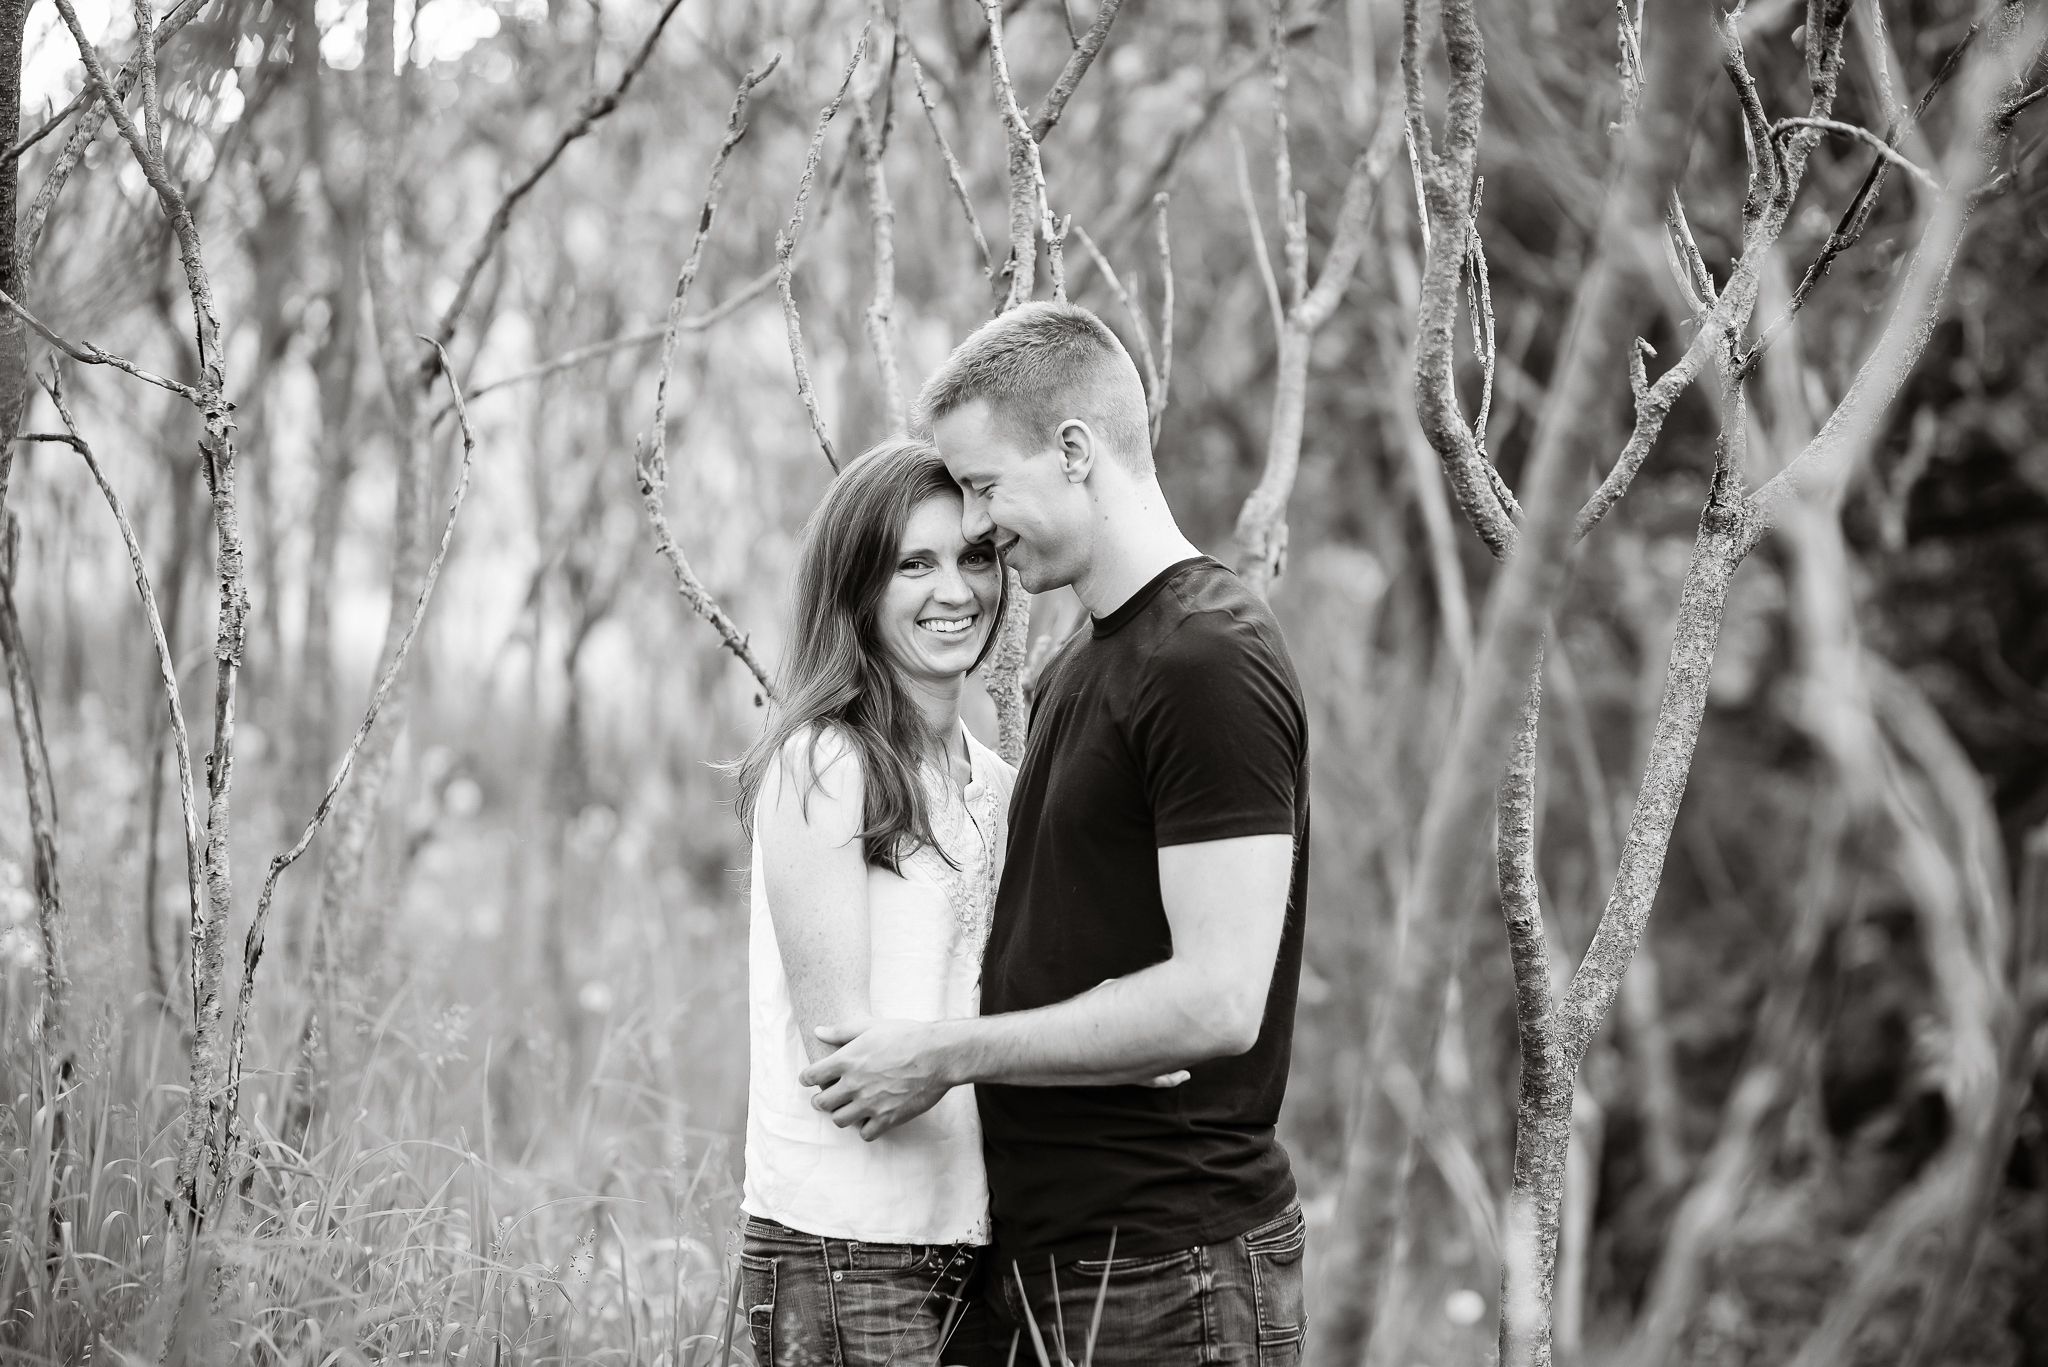 Couples258NaomiLuciennePhotography062019-Edit.jpg